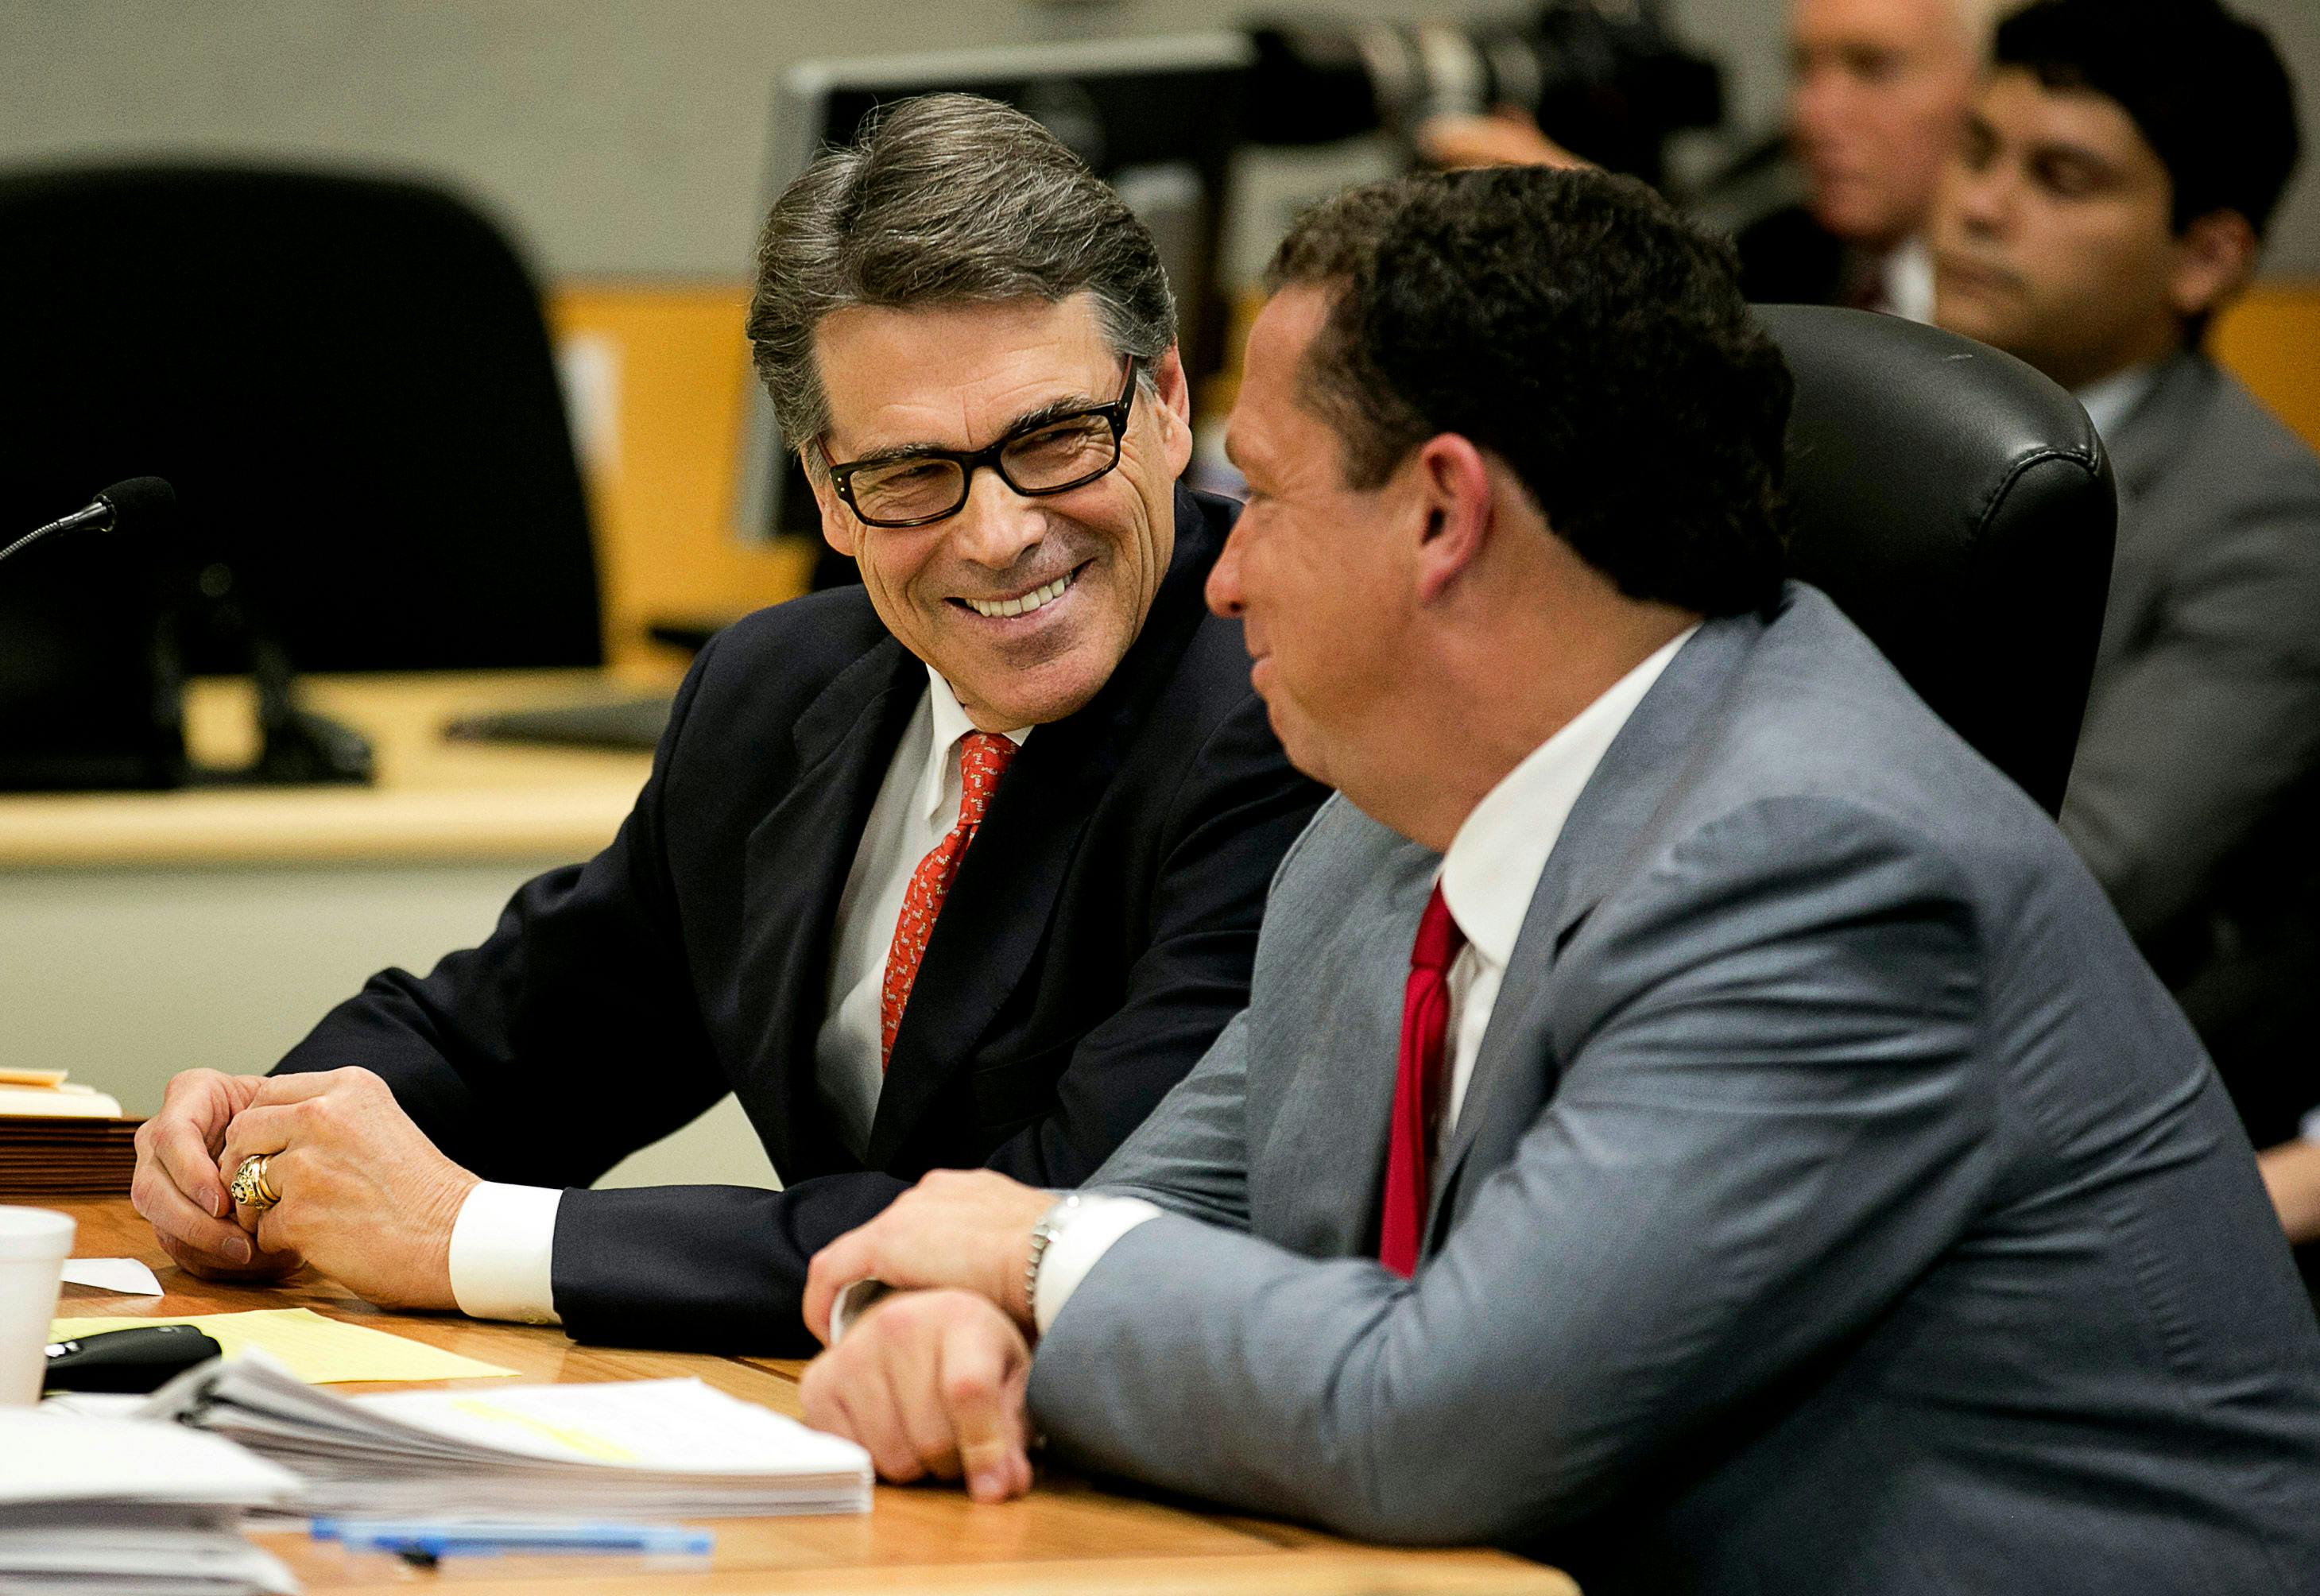 Buzbee and Rick Perry smiling together at hearing